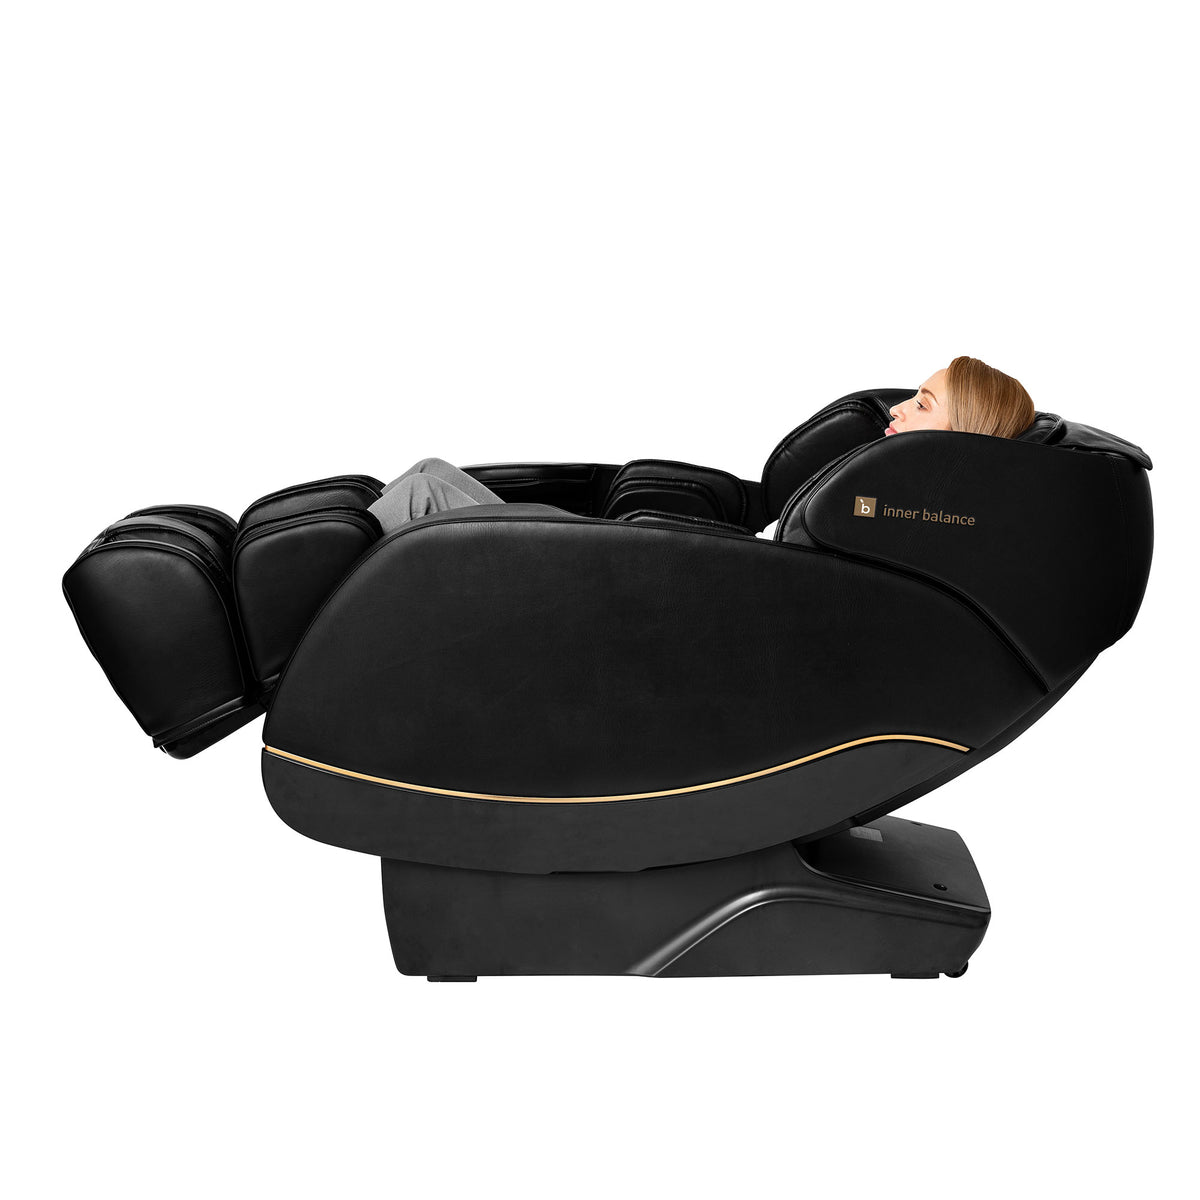 Side view of a person relaxing in a fully reclined Inner Balance Wellness Jin 2.0 Massage Chair in classic black with gold trimming